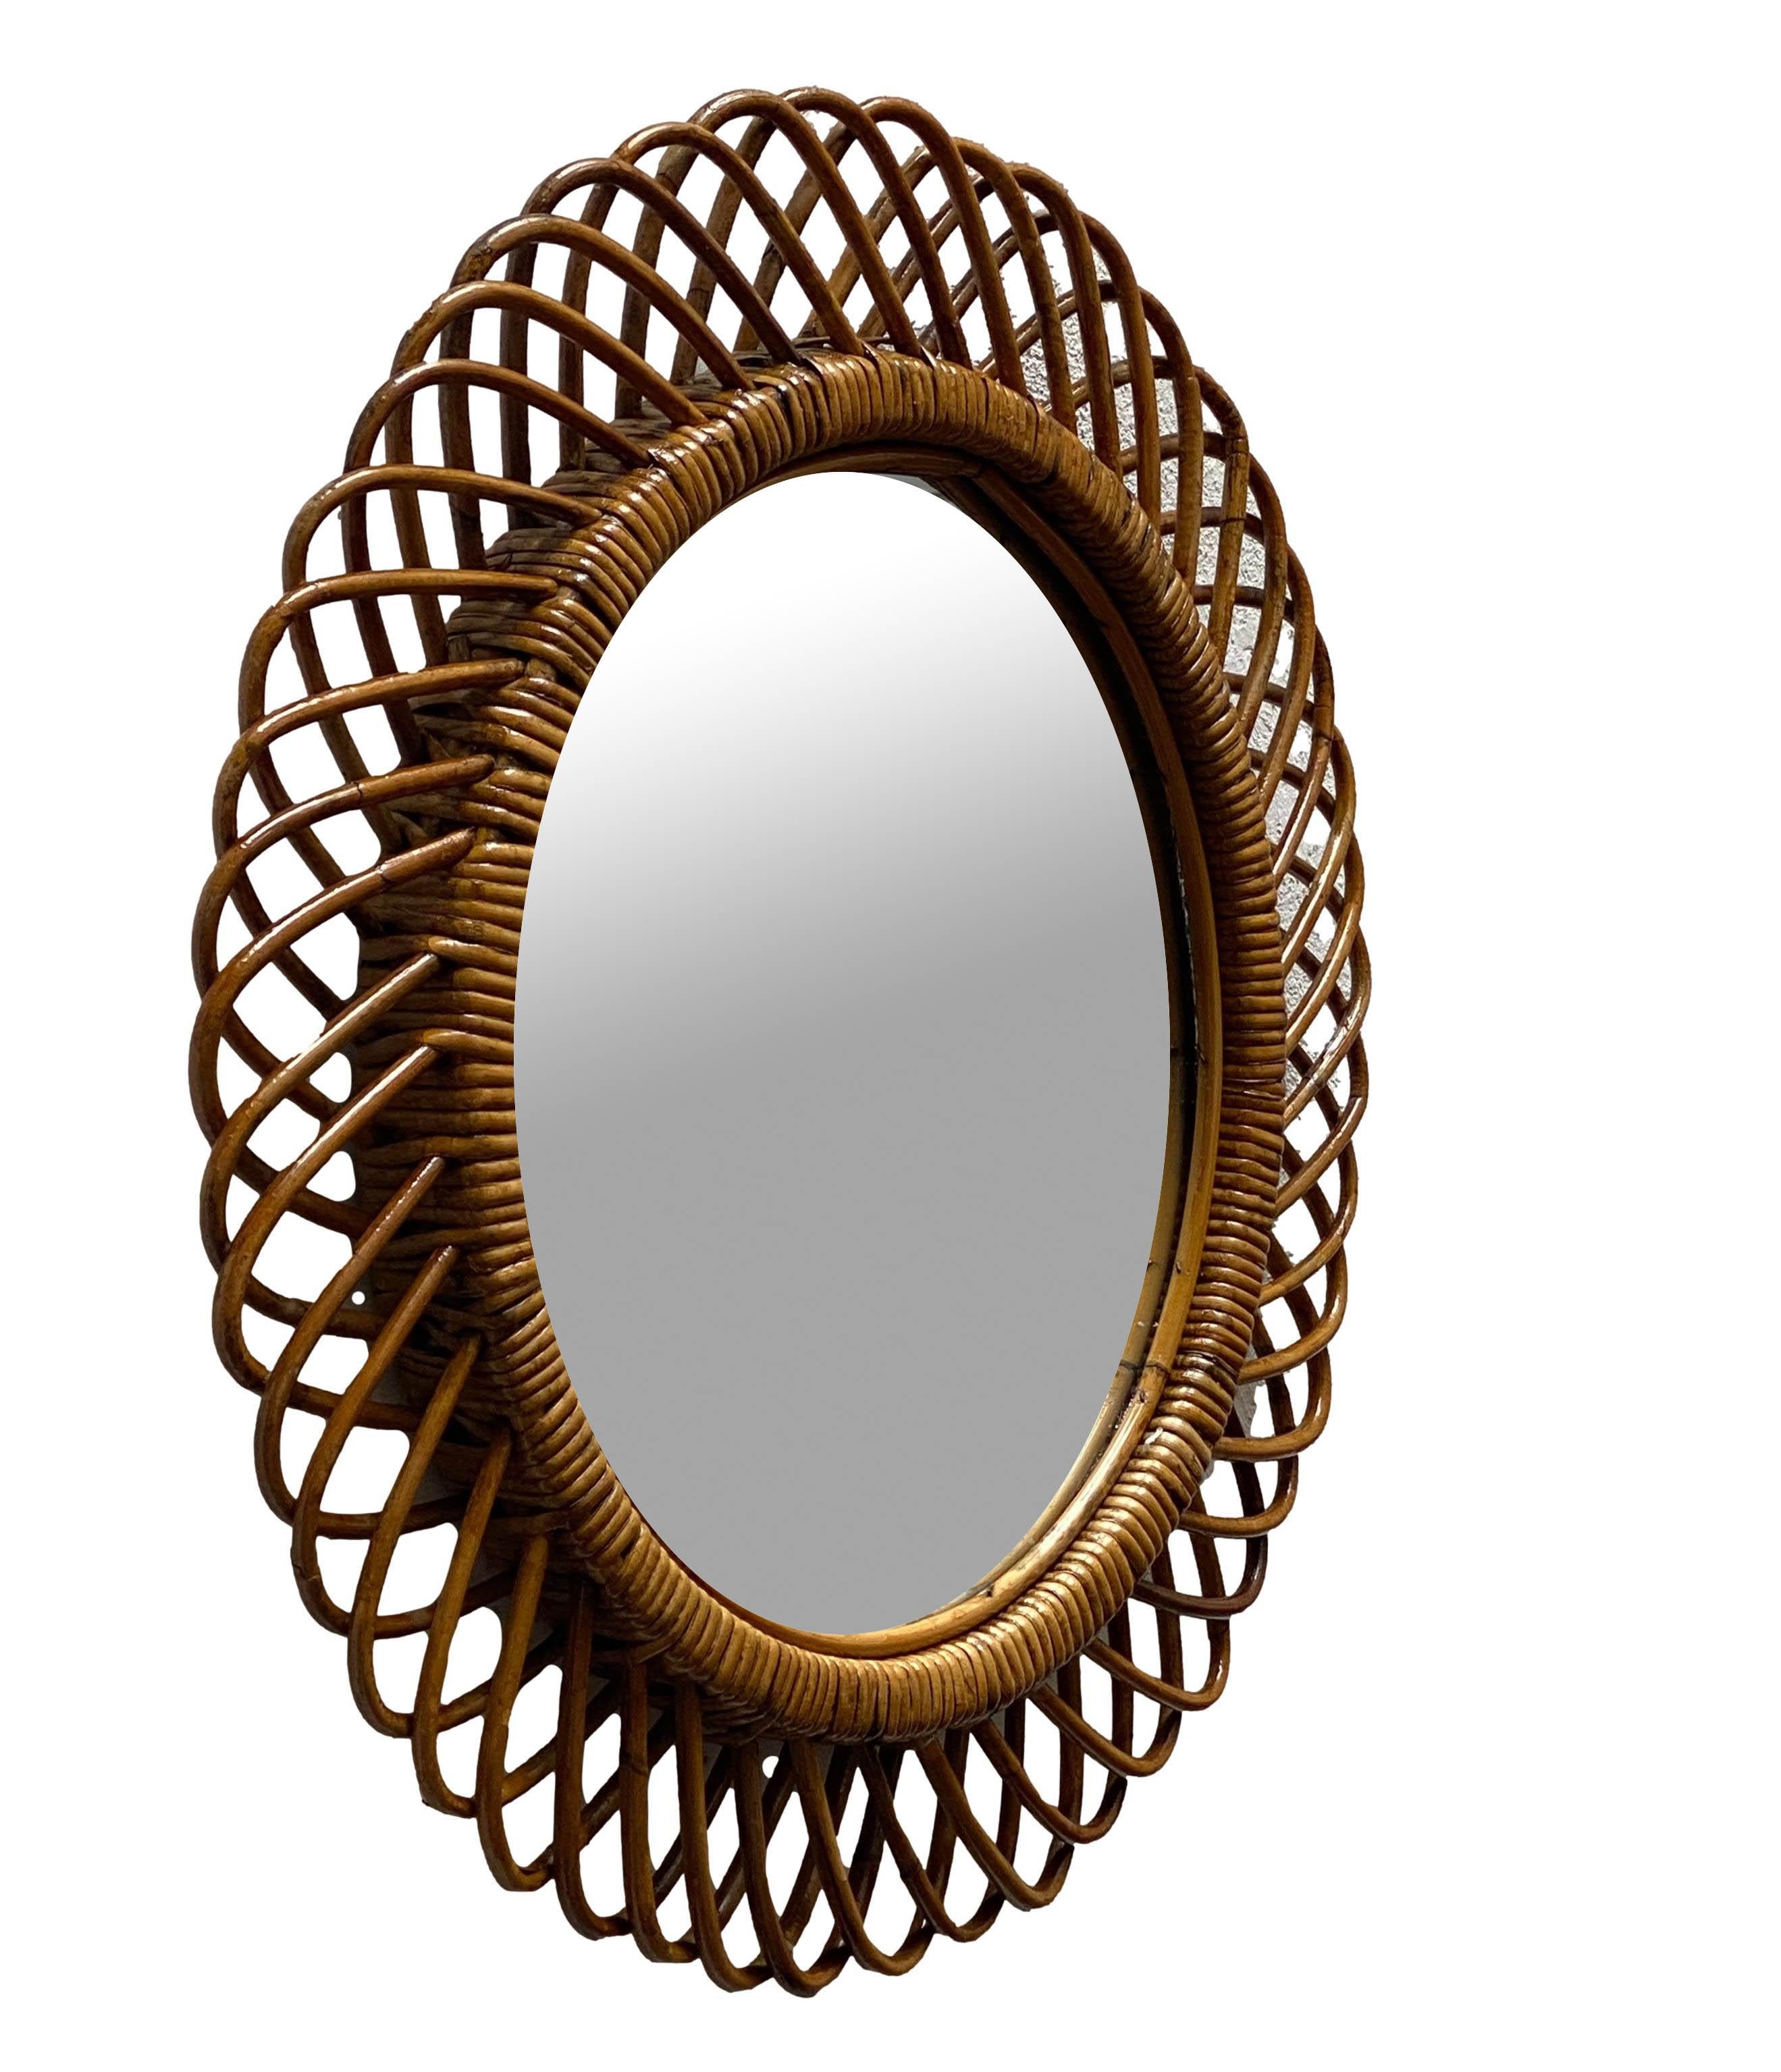 Italian rattan wall mirror (circa 1960s) by Franco Albini. The mirror has a complex weave of rattan in a series of horseshoe projections on the edge of the frame. There is a lovely aged patina on the rattan.